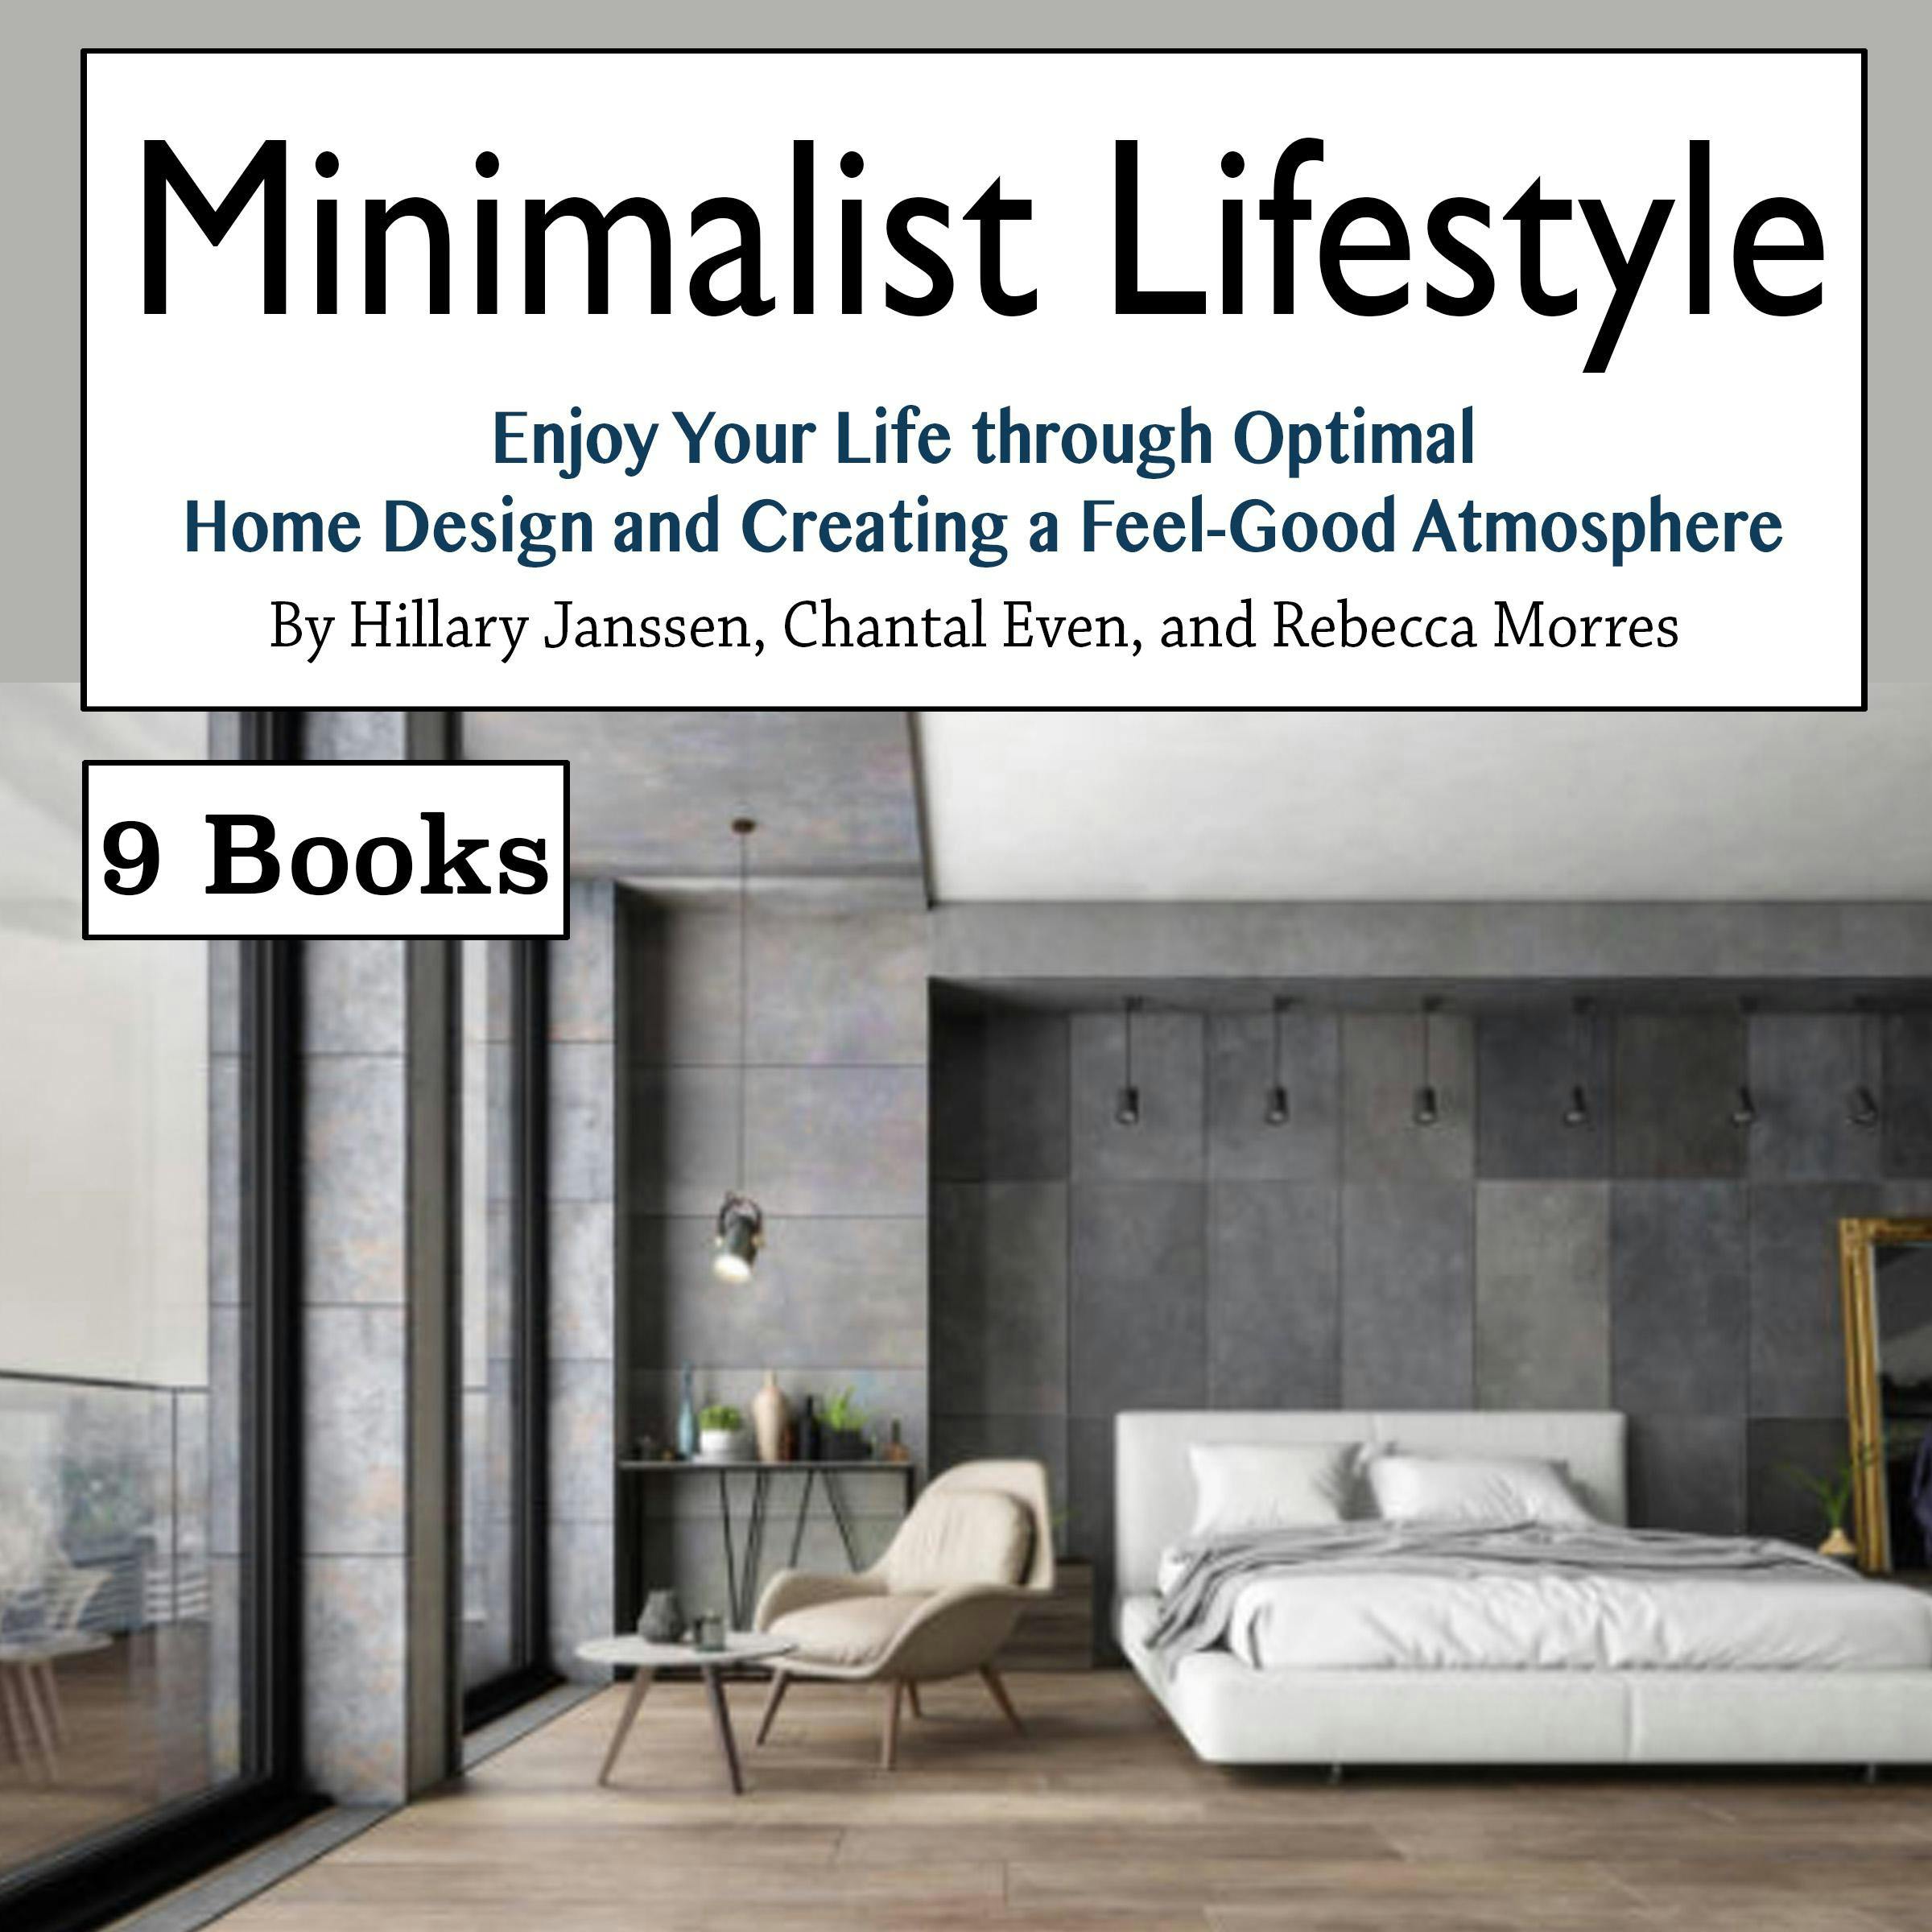 Minimalist Lifestyle: Enjoy Your Life through Optimal Home Design and Creating a Feel-Good Atmosphere - Rebecca Morres, Hillary Janssen, Chantal Even